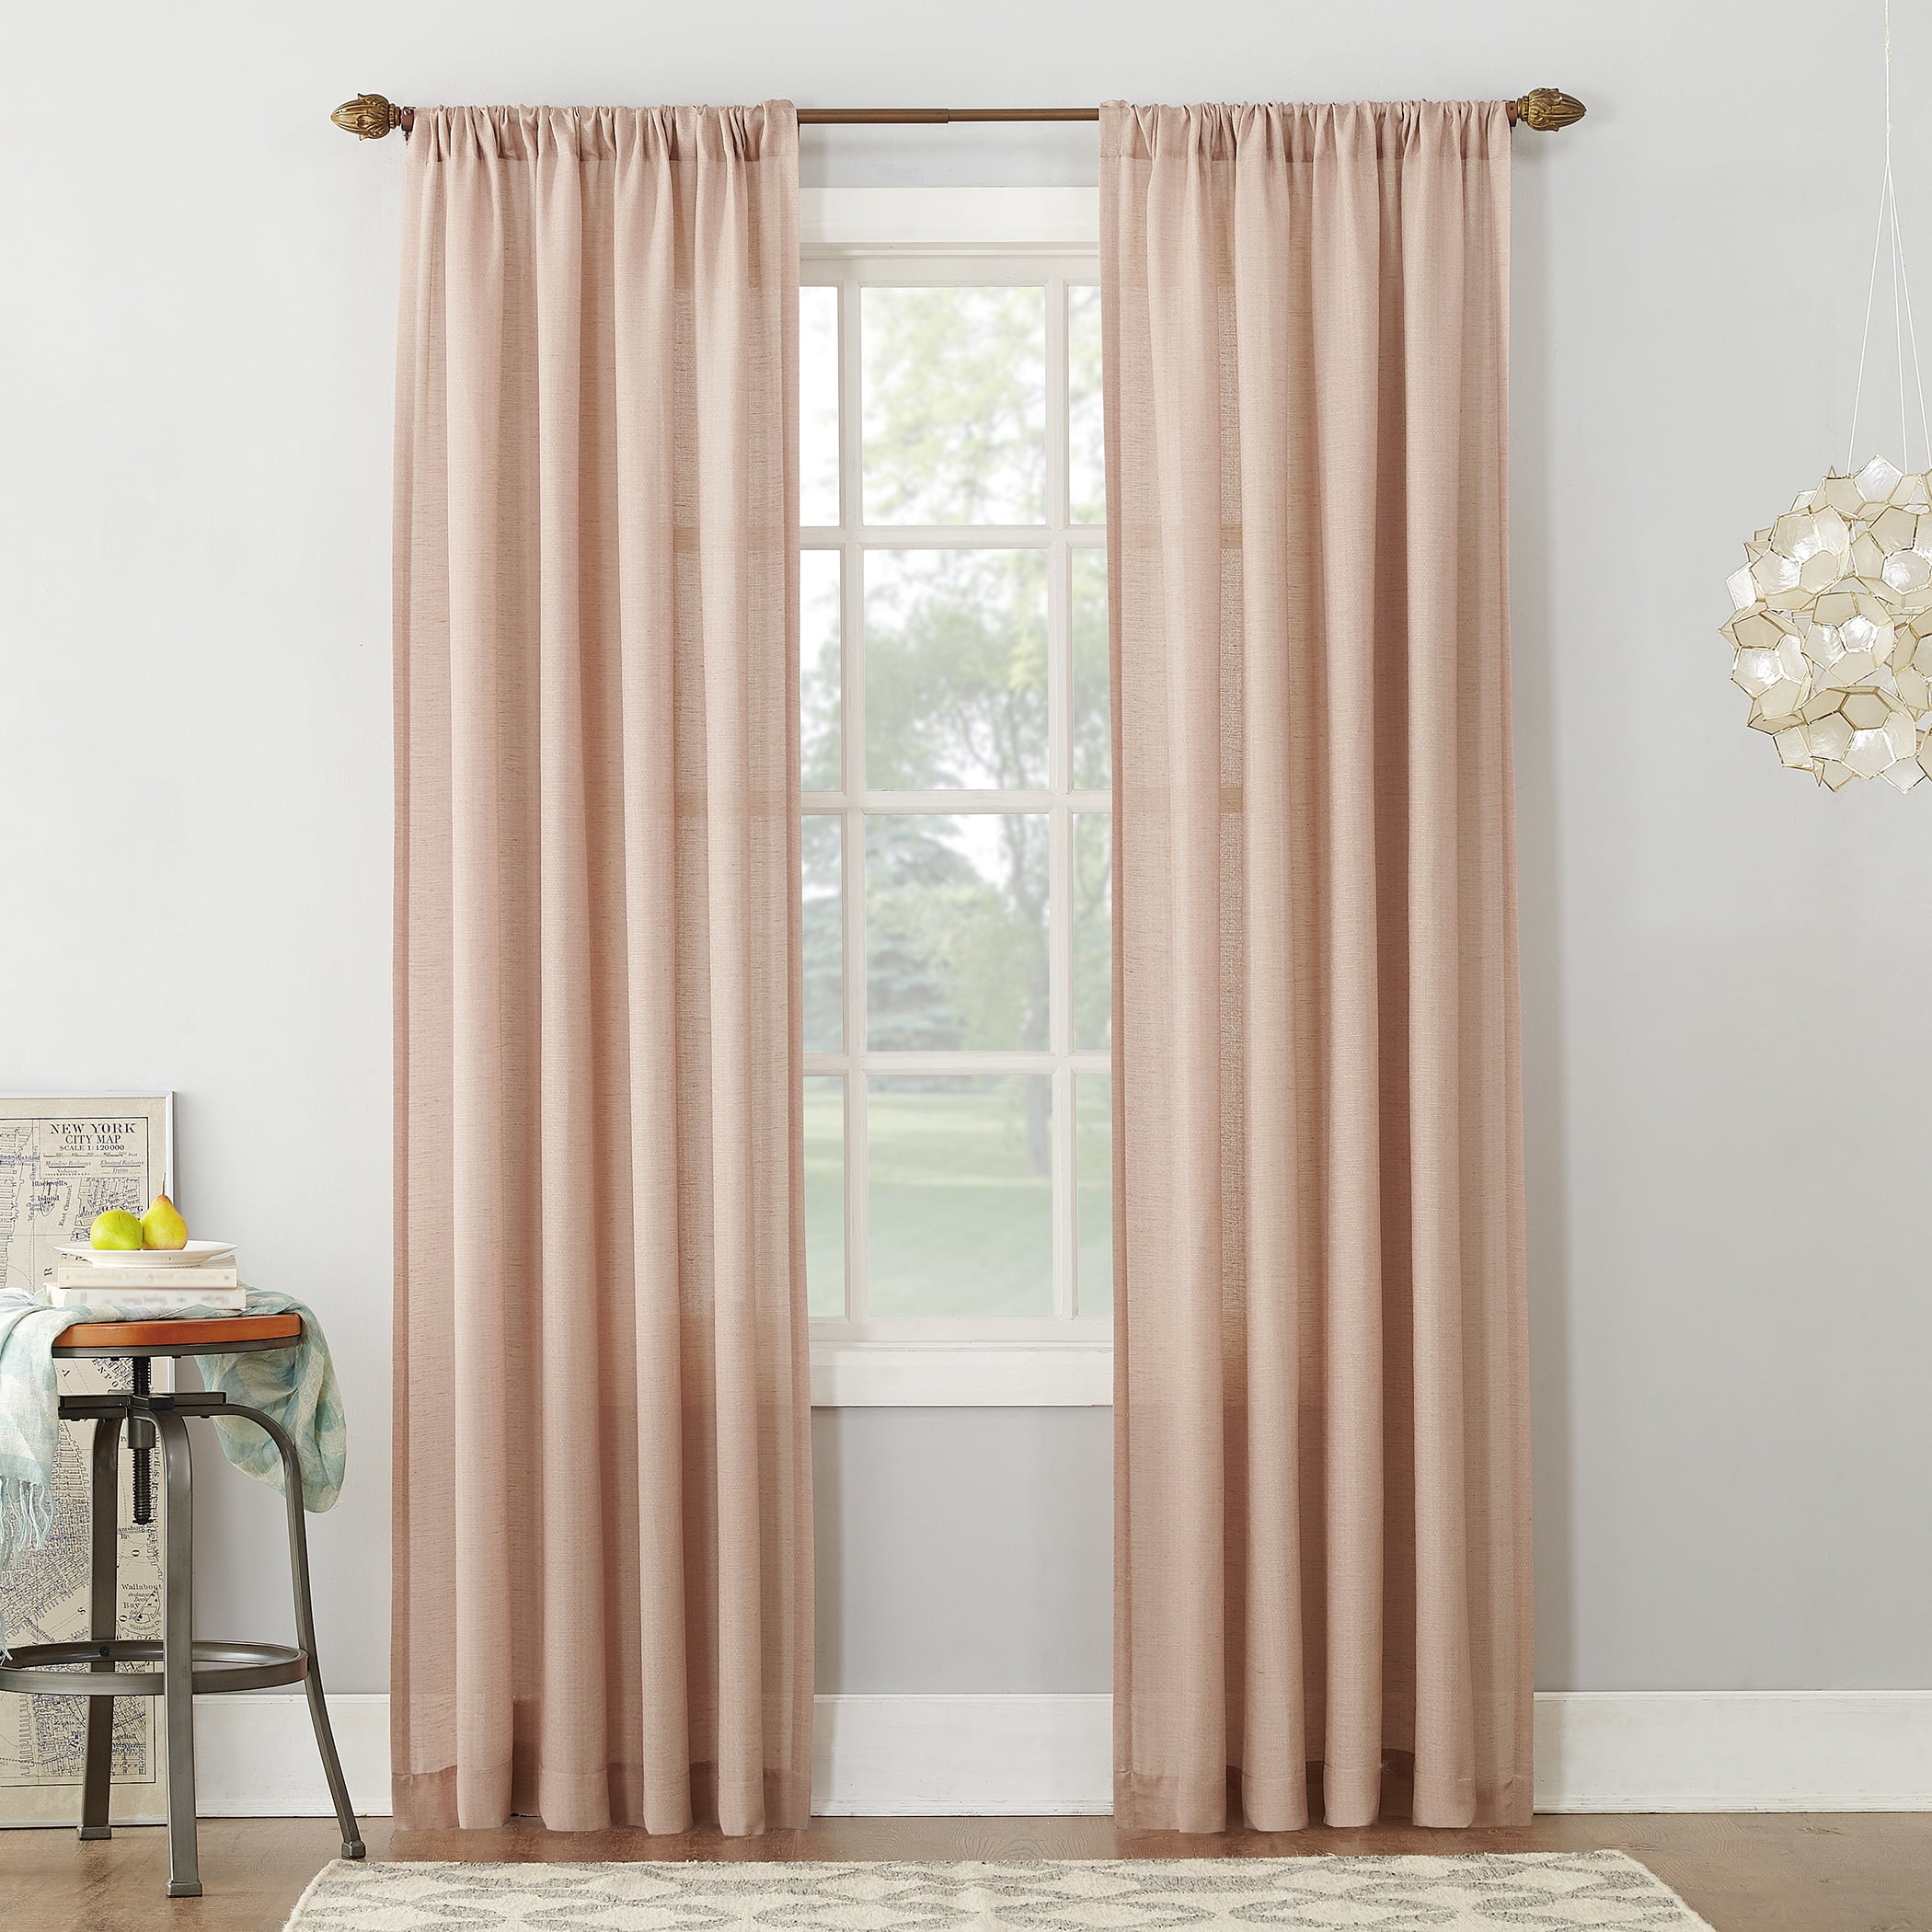 1PC TAUPE GOLD SHADES GROMMET VOILE SHEER PANEL WINDOW CURTAIN DRAPE #S38 